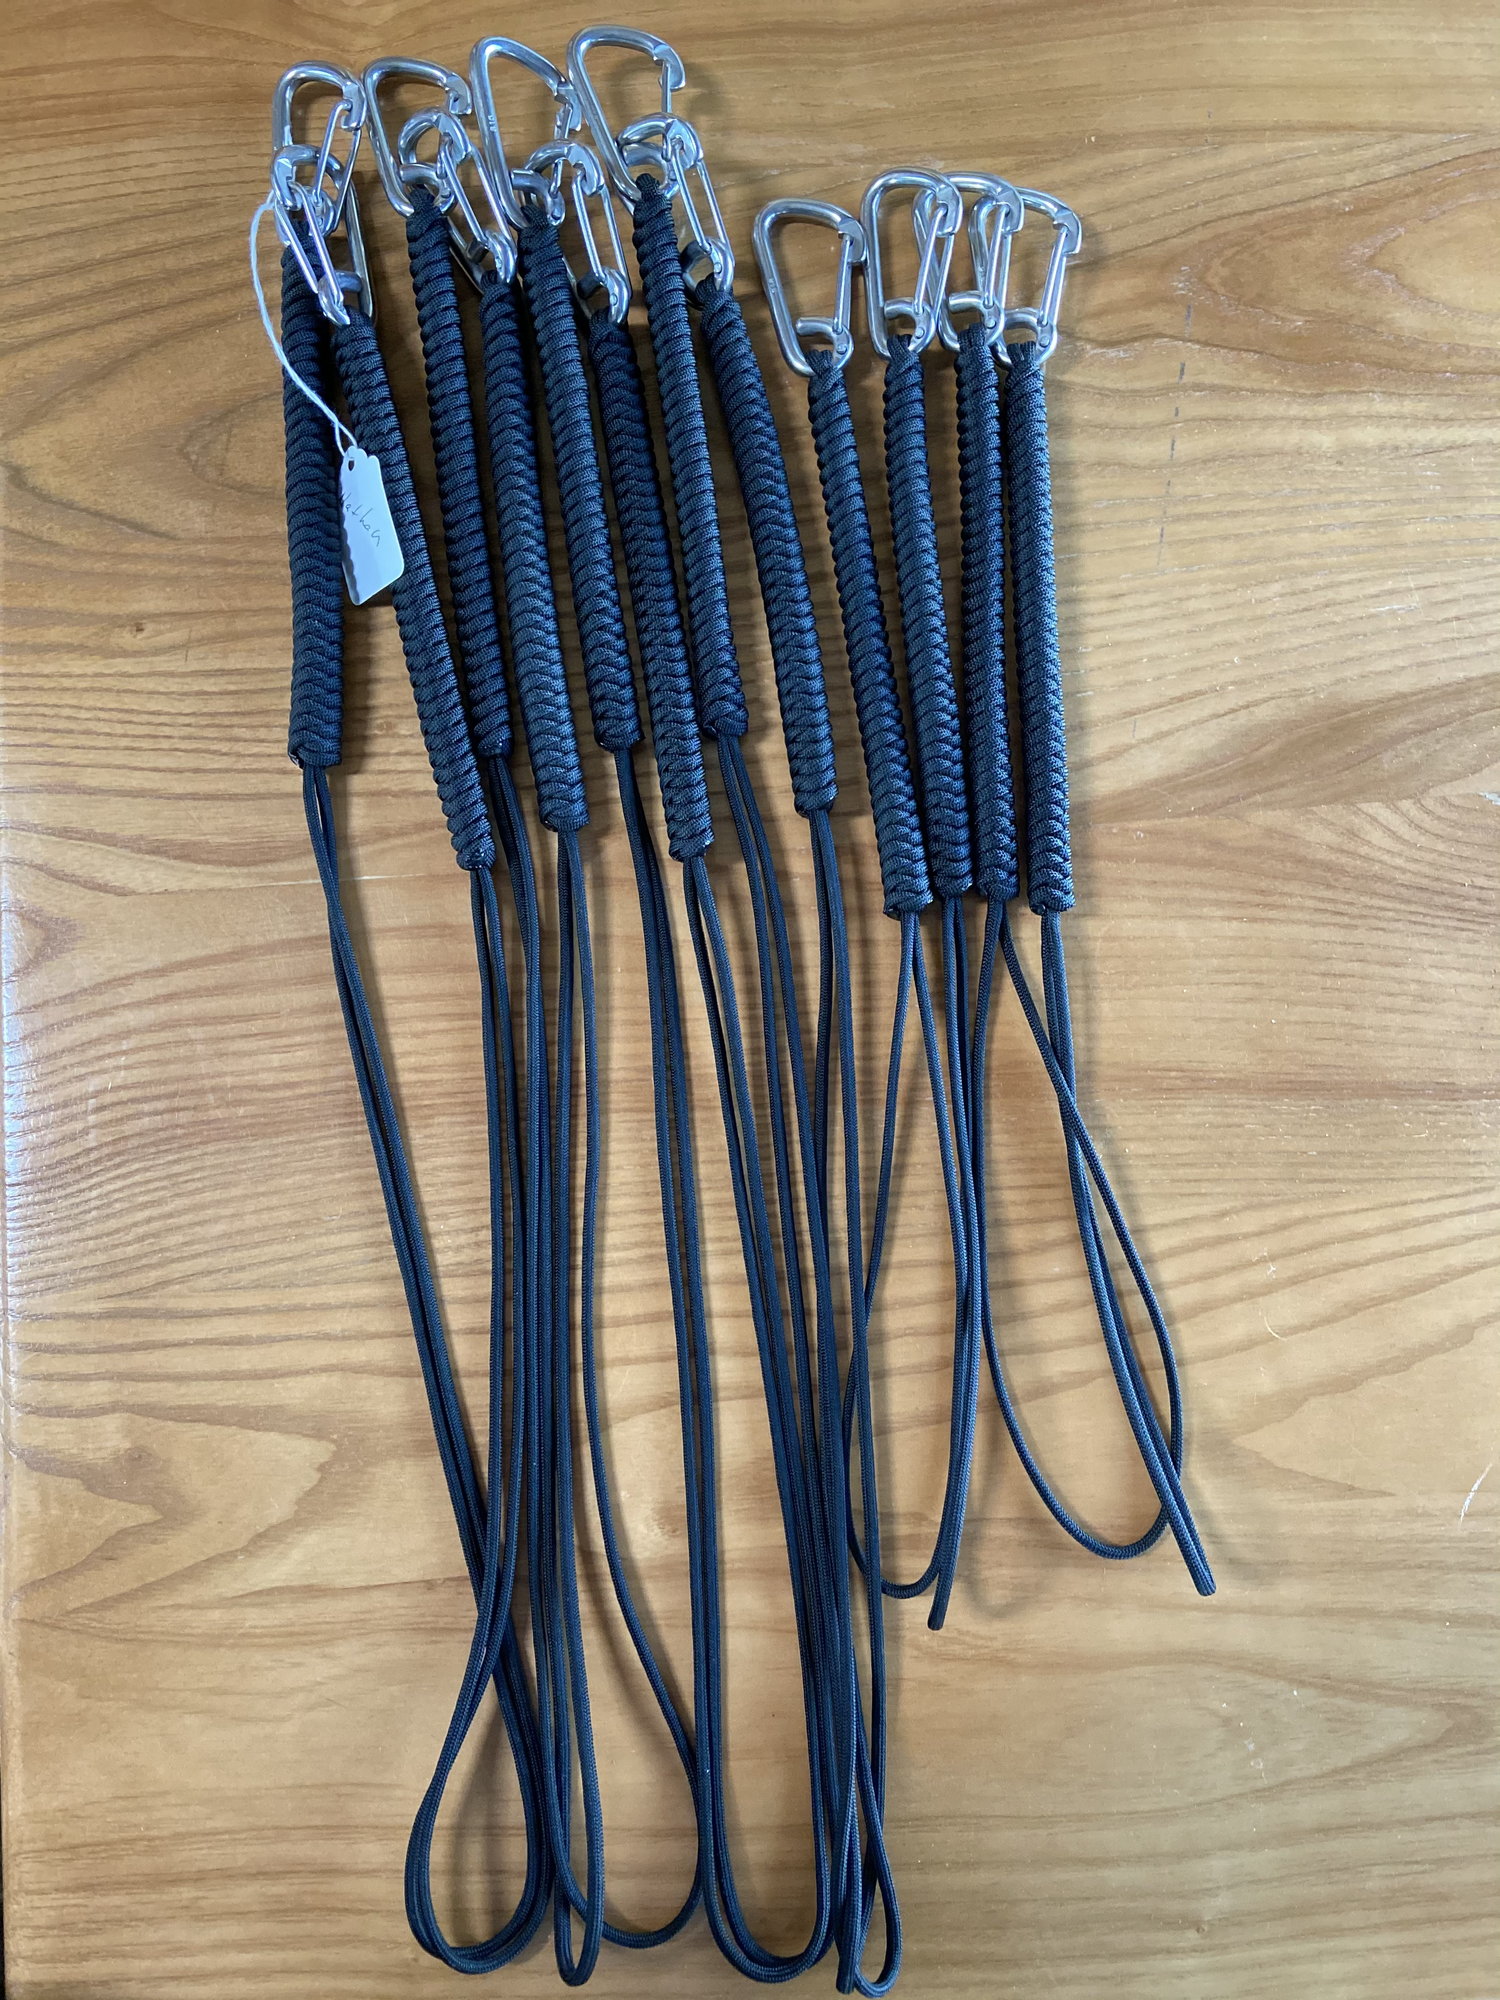 Rod Leashes.Super Stretch!! - The Hull Truth - Boating and Fishing Forum